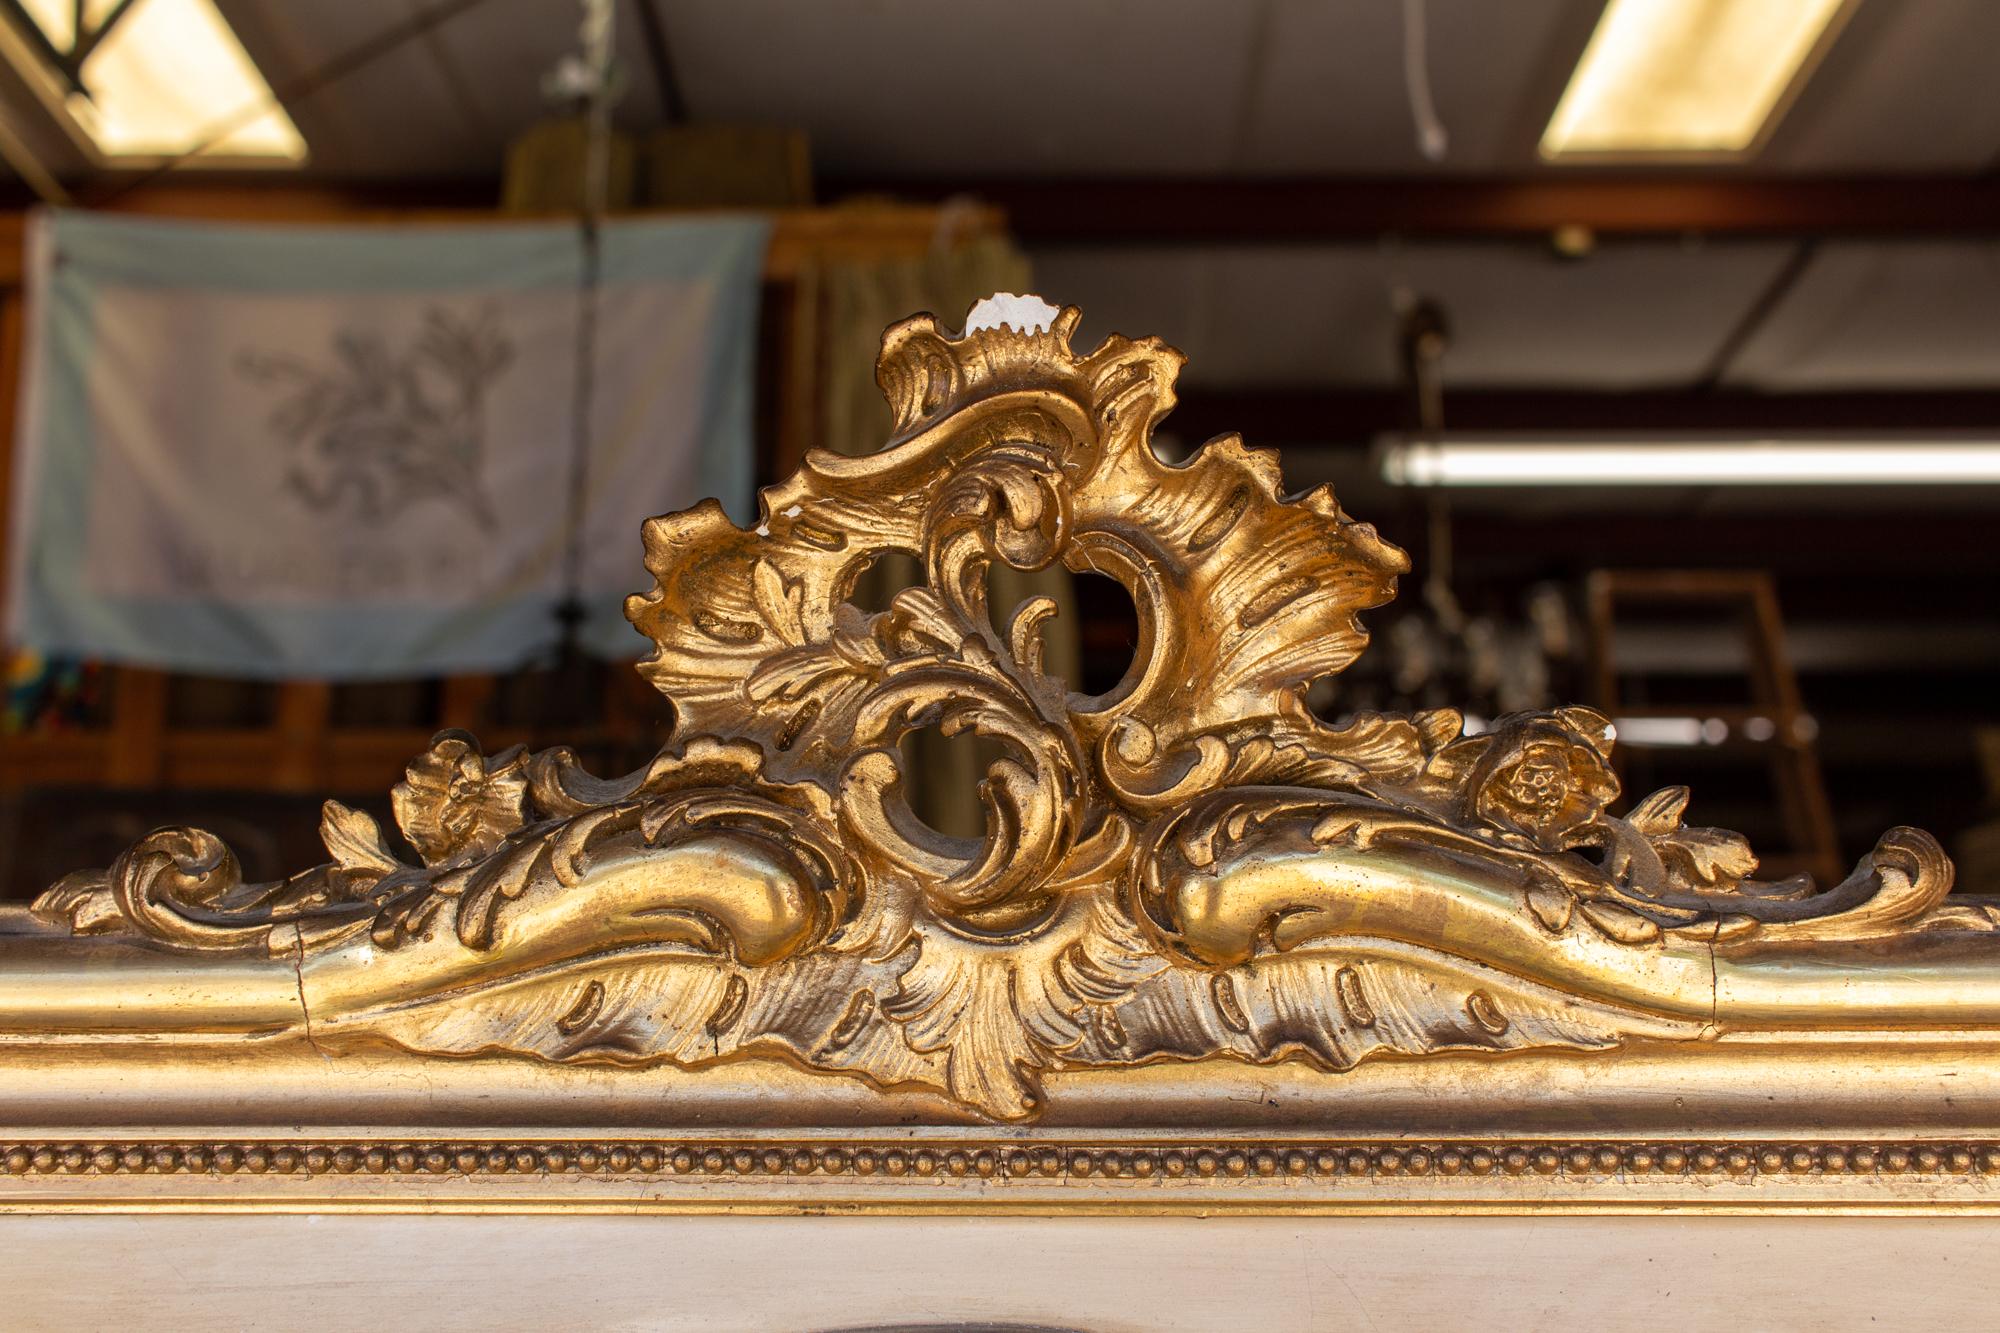 18th Century Antique French Gilt Louis XV Style Trumeau Mirror with Plaster Panel